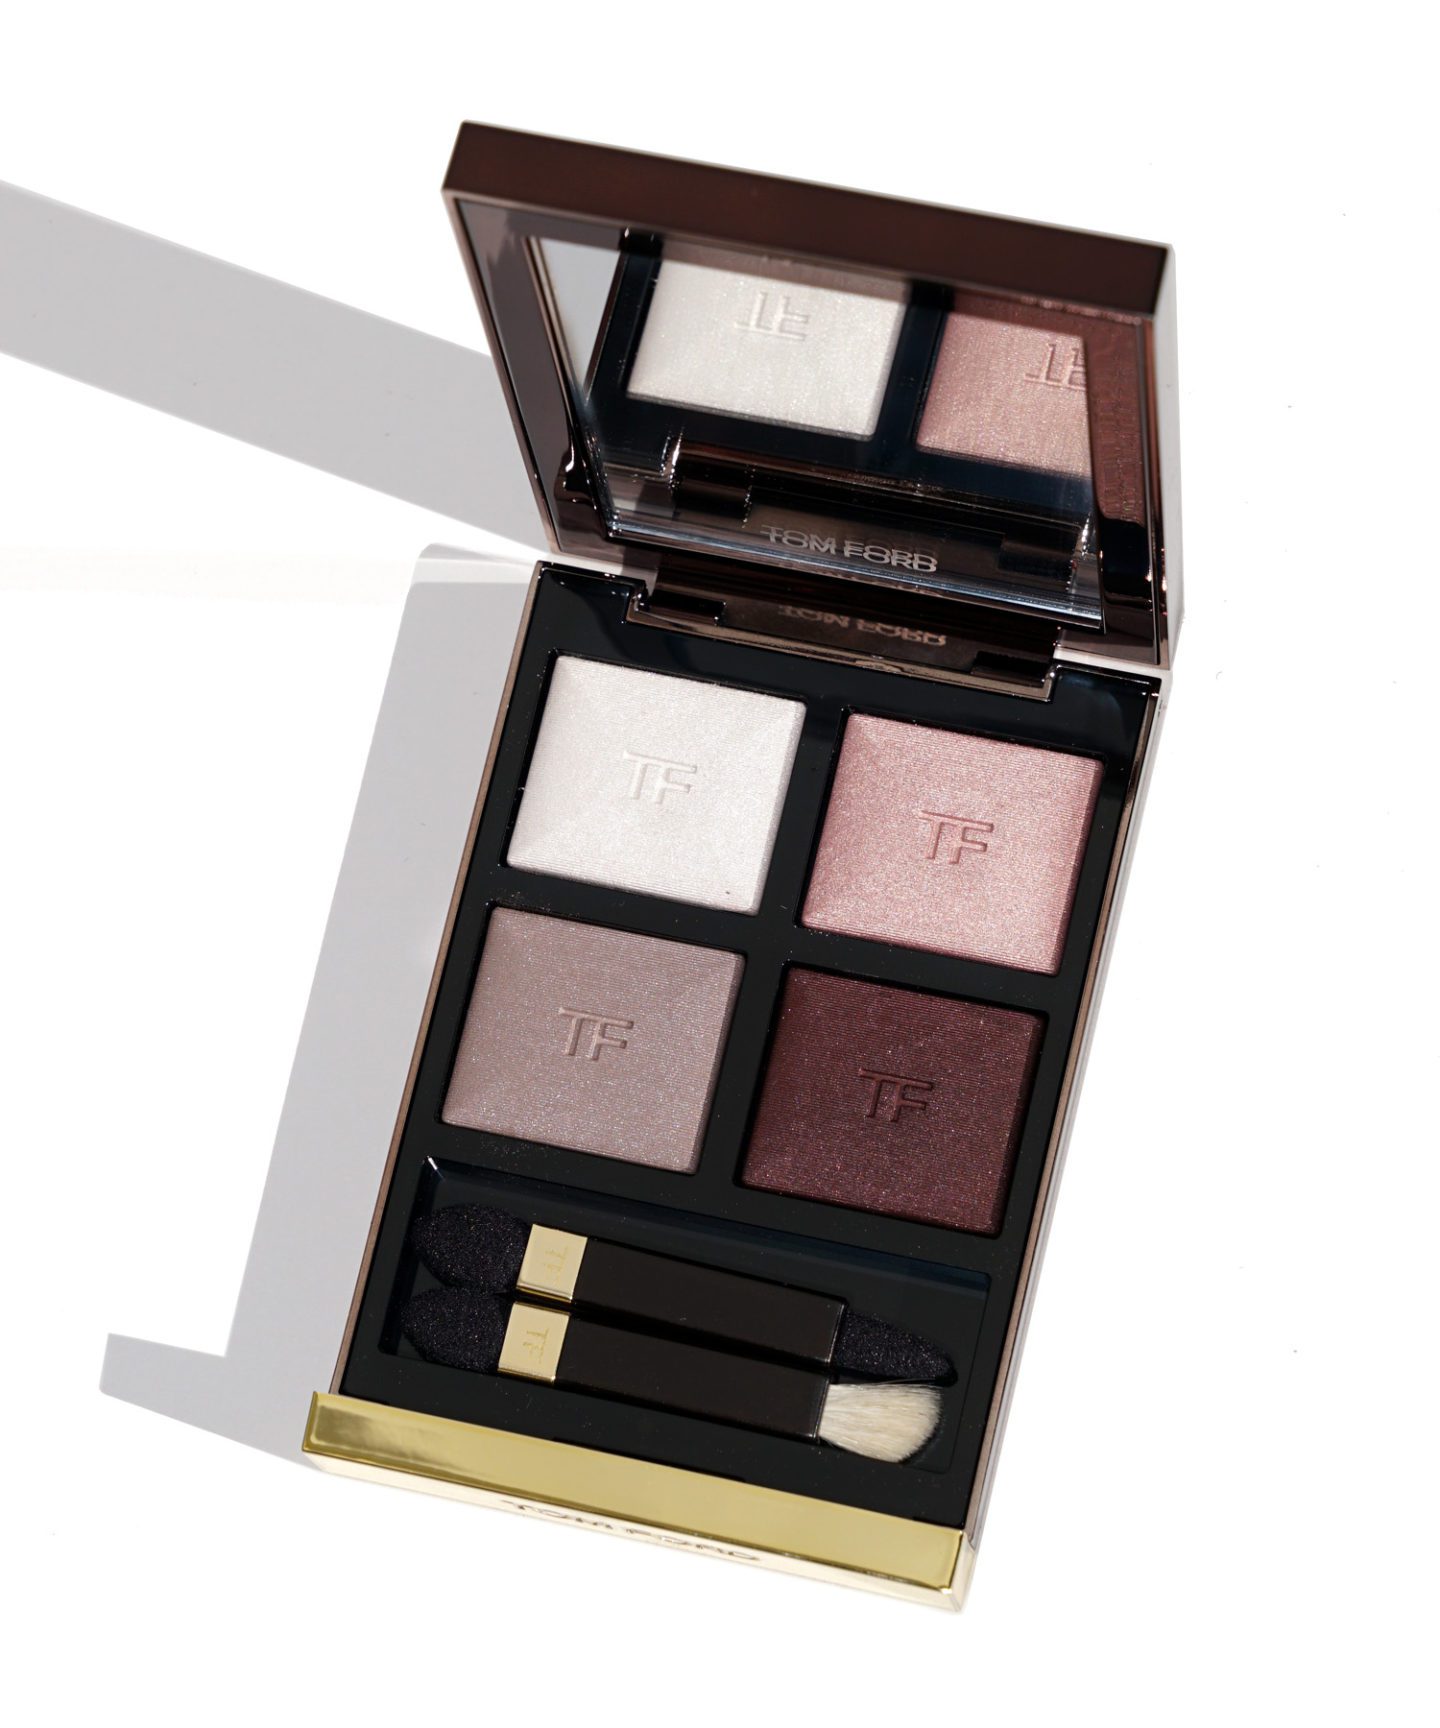 Tom Ford Virgin Orchid Eyeshadow Quad Review | The Beauty Look Book